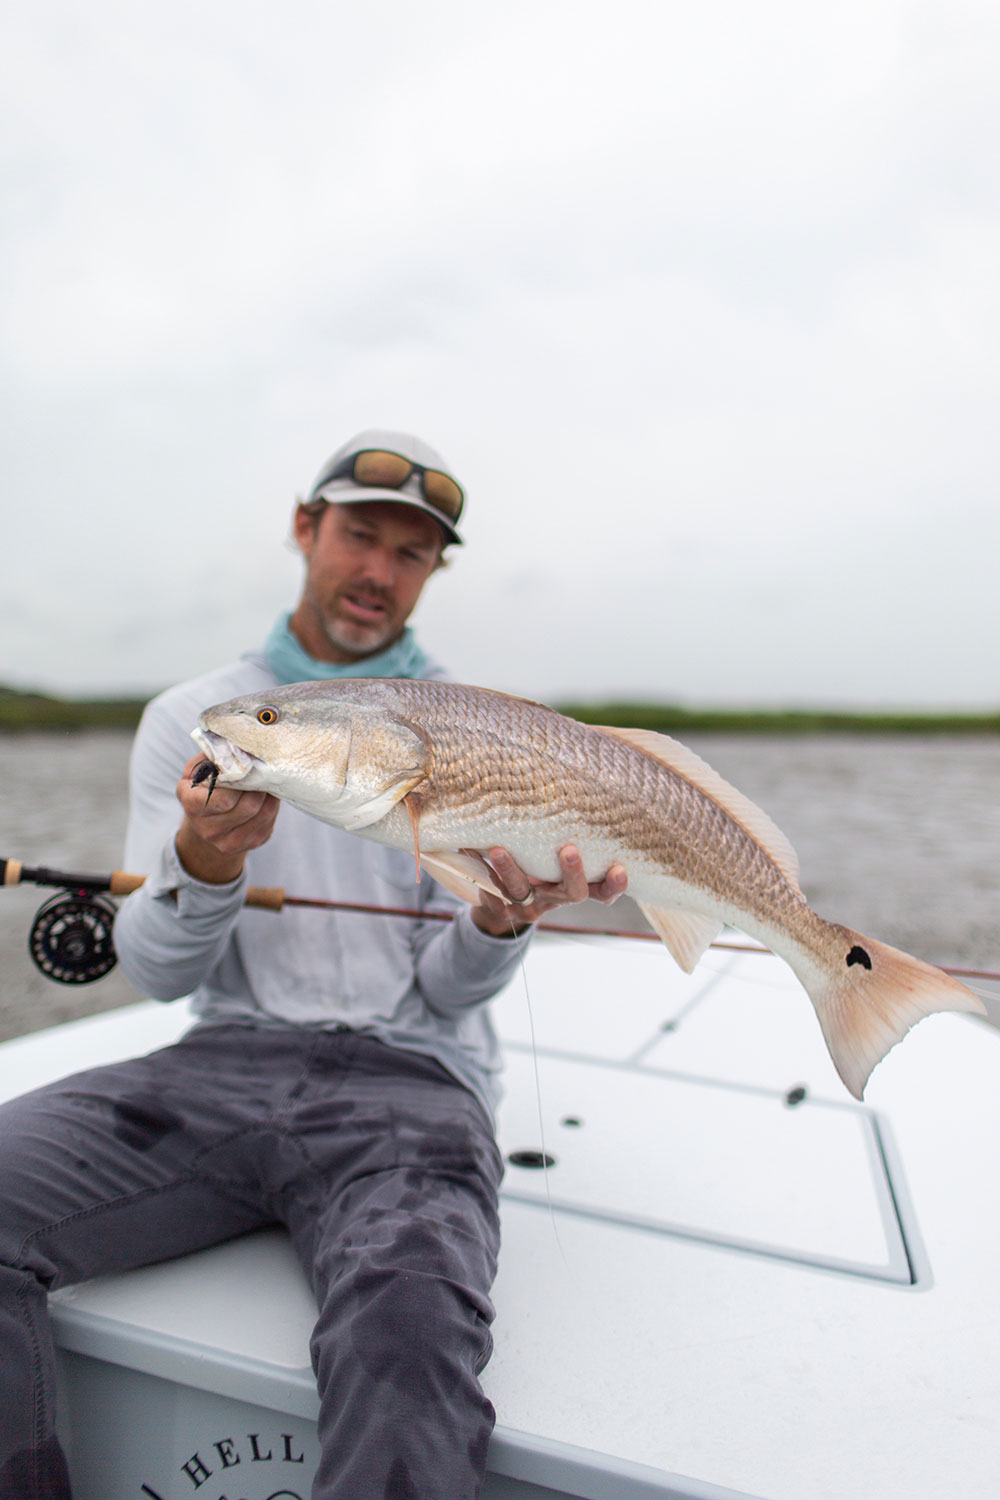 Jacksonville Fishing Charter, Fly Fishing Jacksonville, Redfish Jacksonville, Florida Fishing Charter, Hells Bay Whipray, Fishing Guide